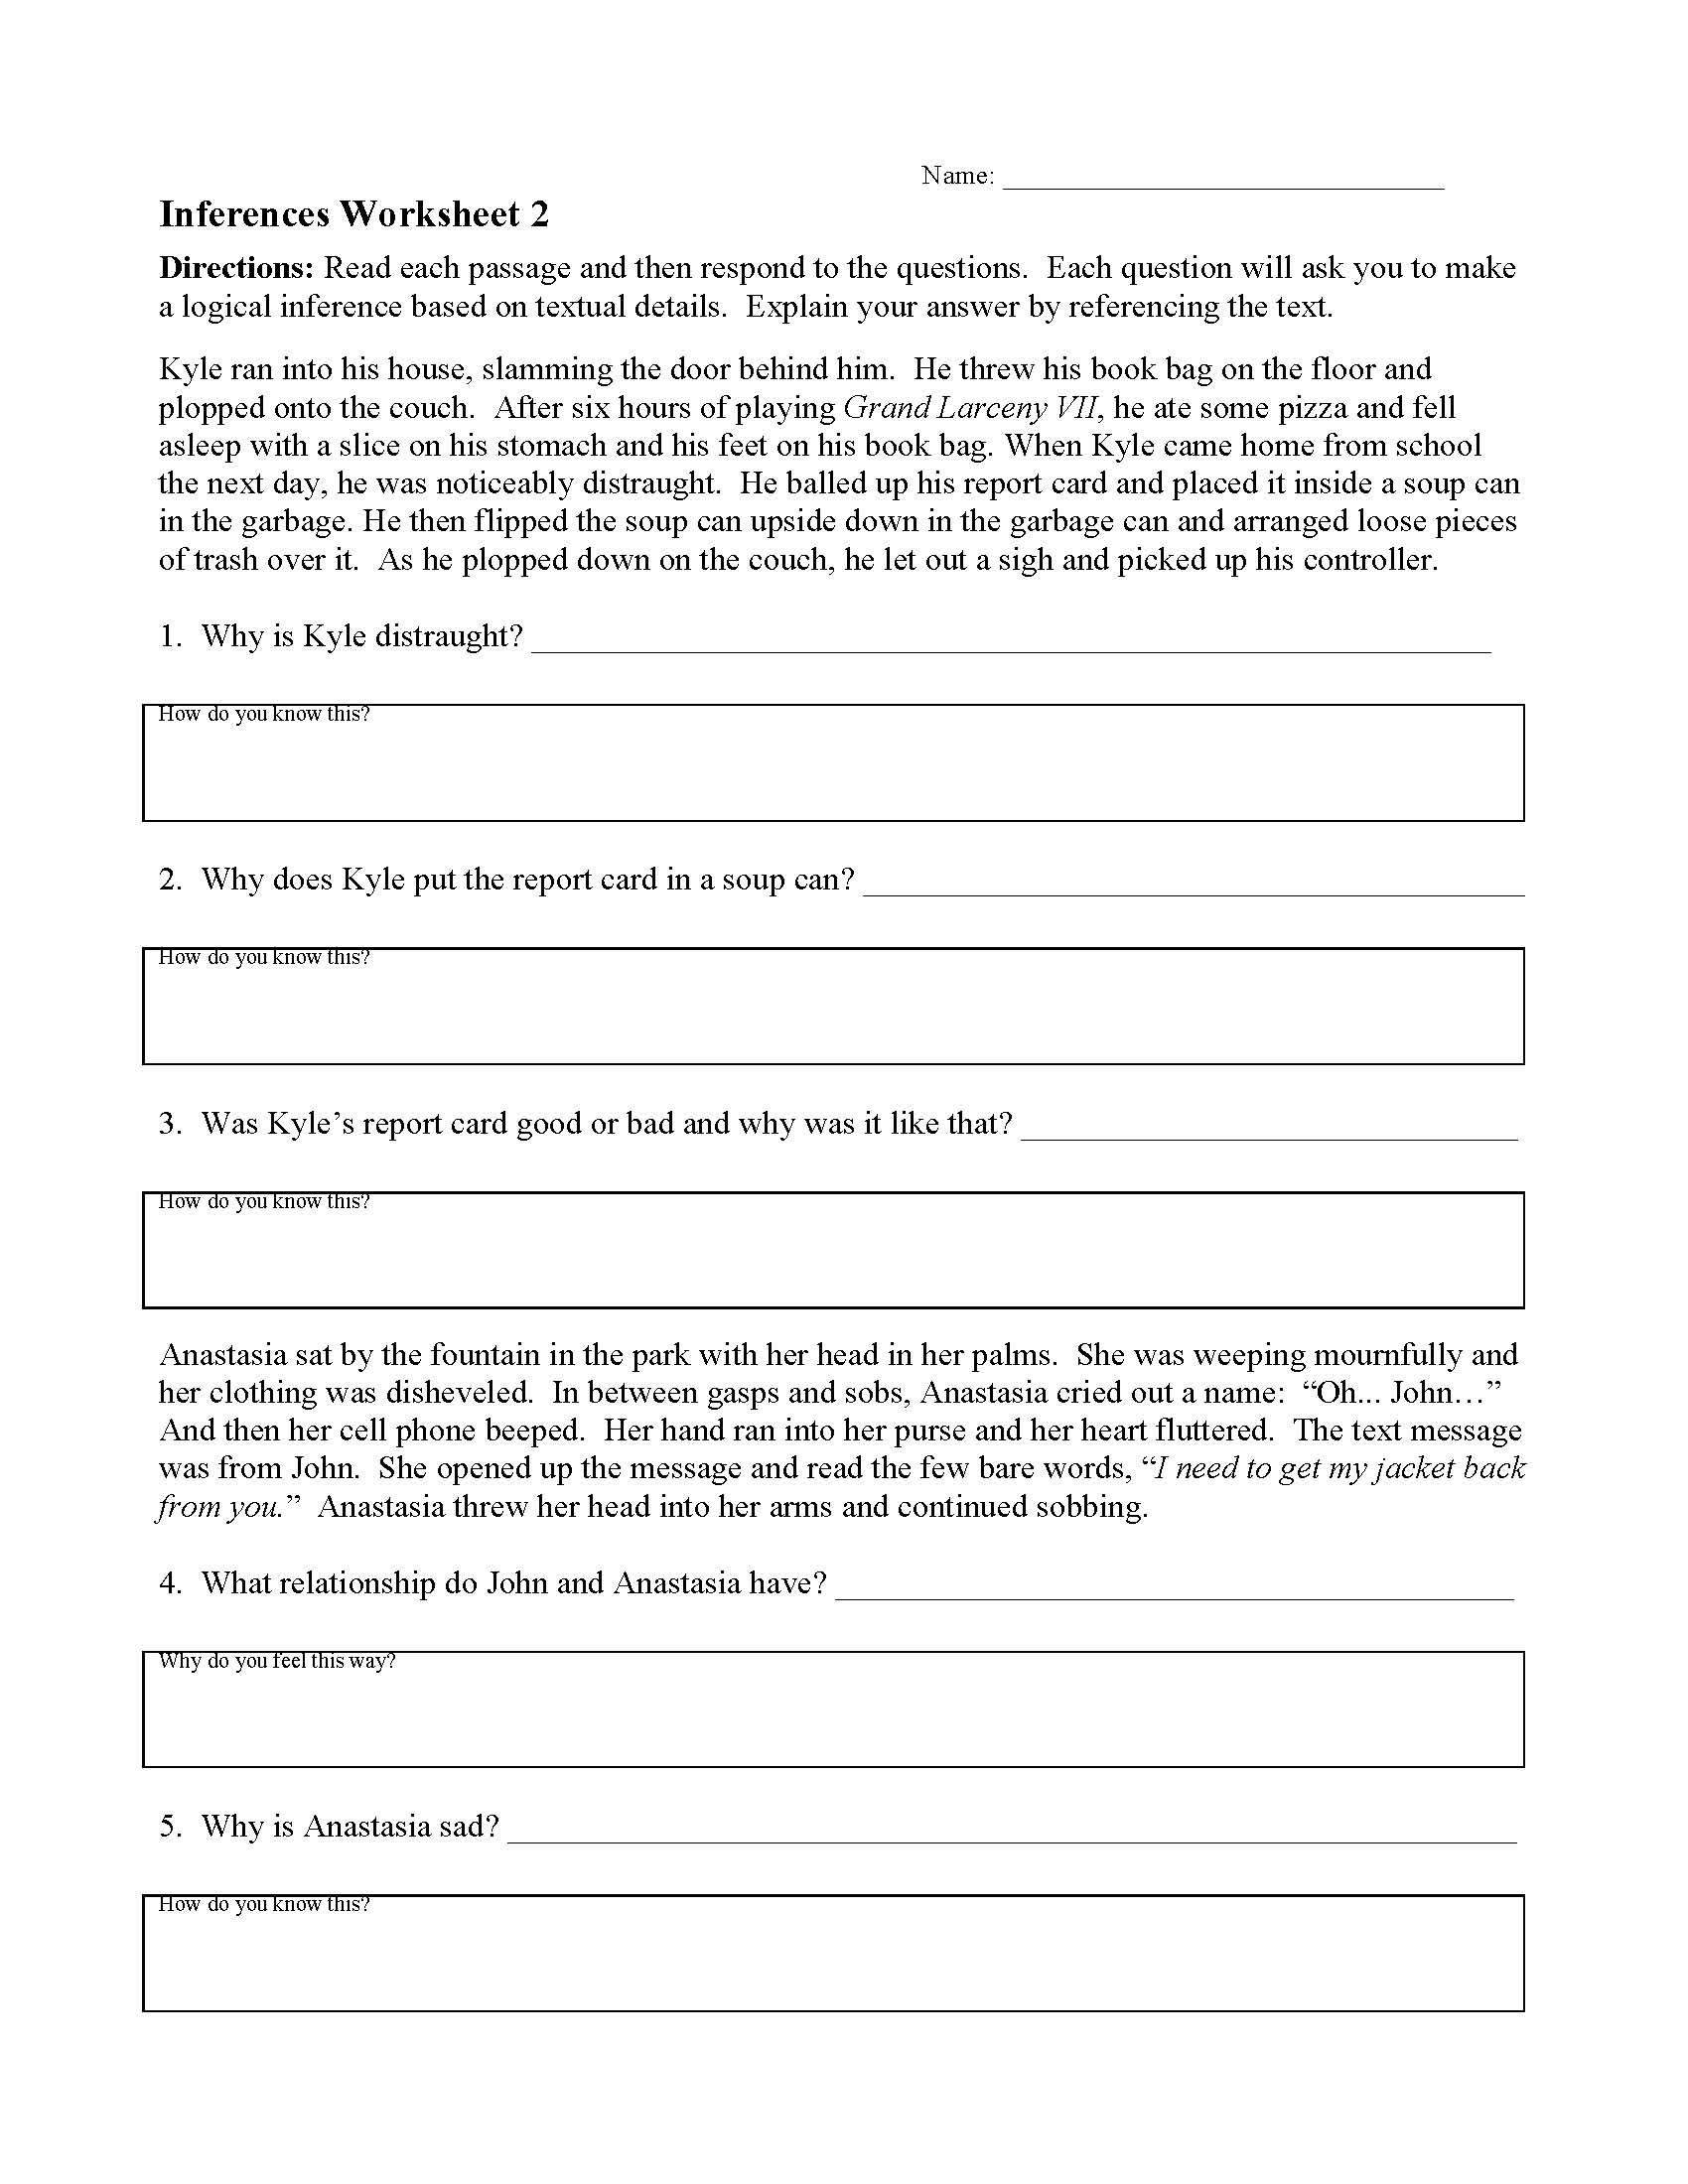 Inferences Worksheet 2 | Preview